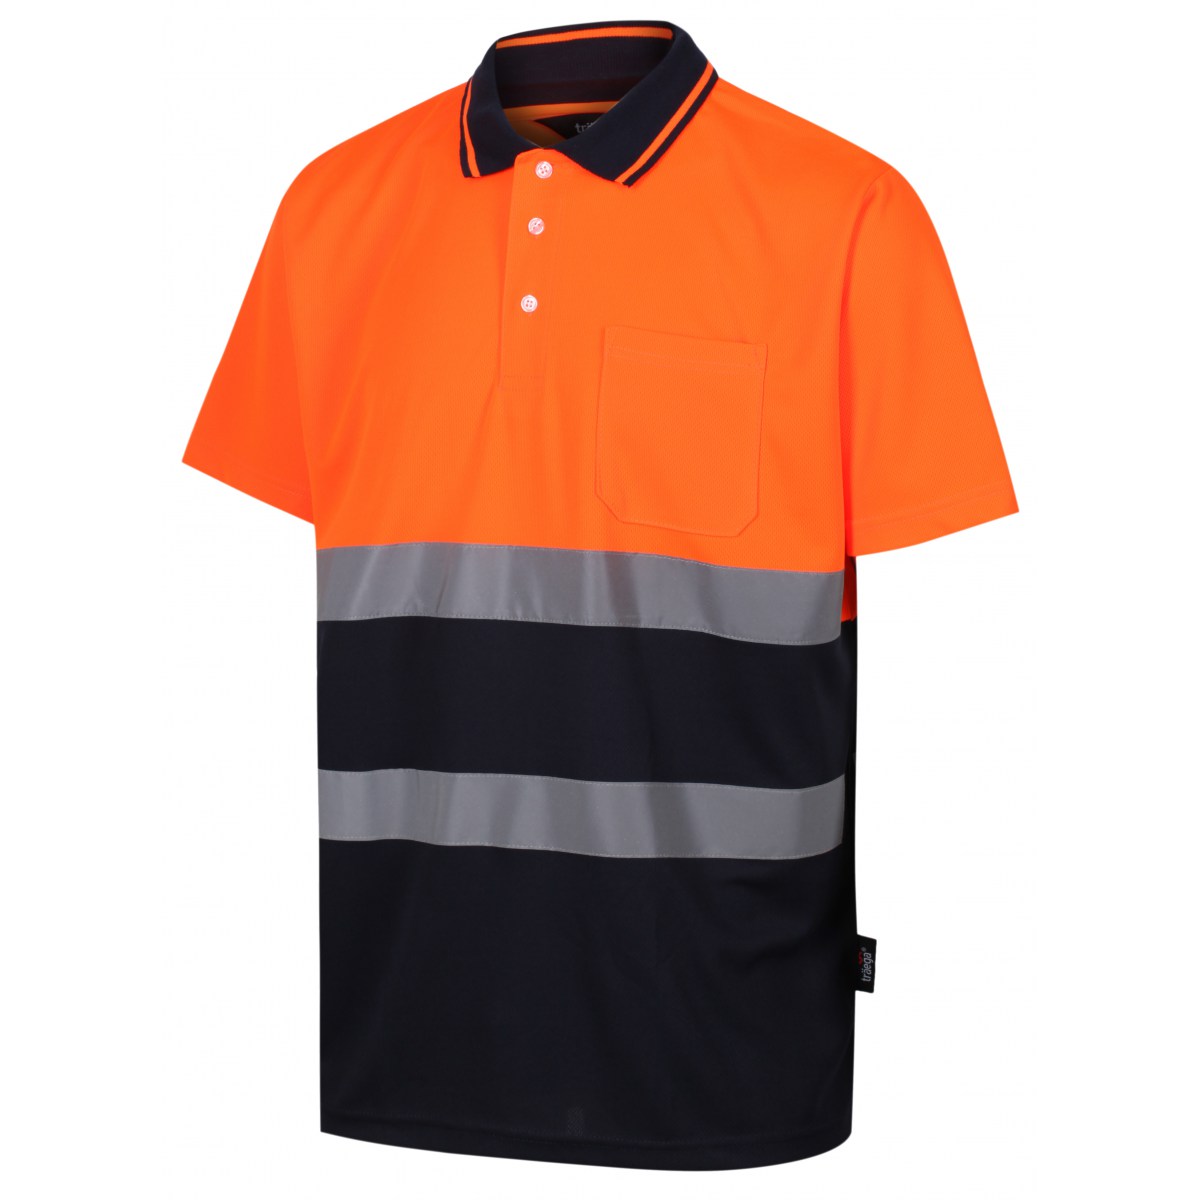 TPS03 HI VIS CONTRAST POLO SHIRT - AAA Safety Supplies Limited